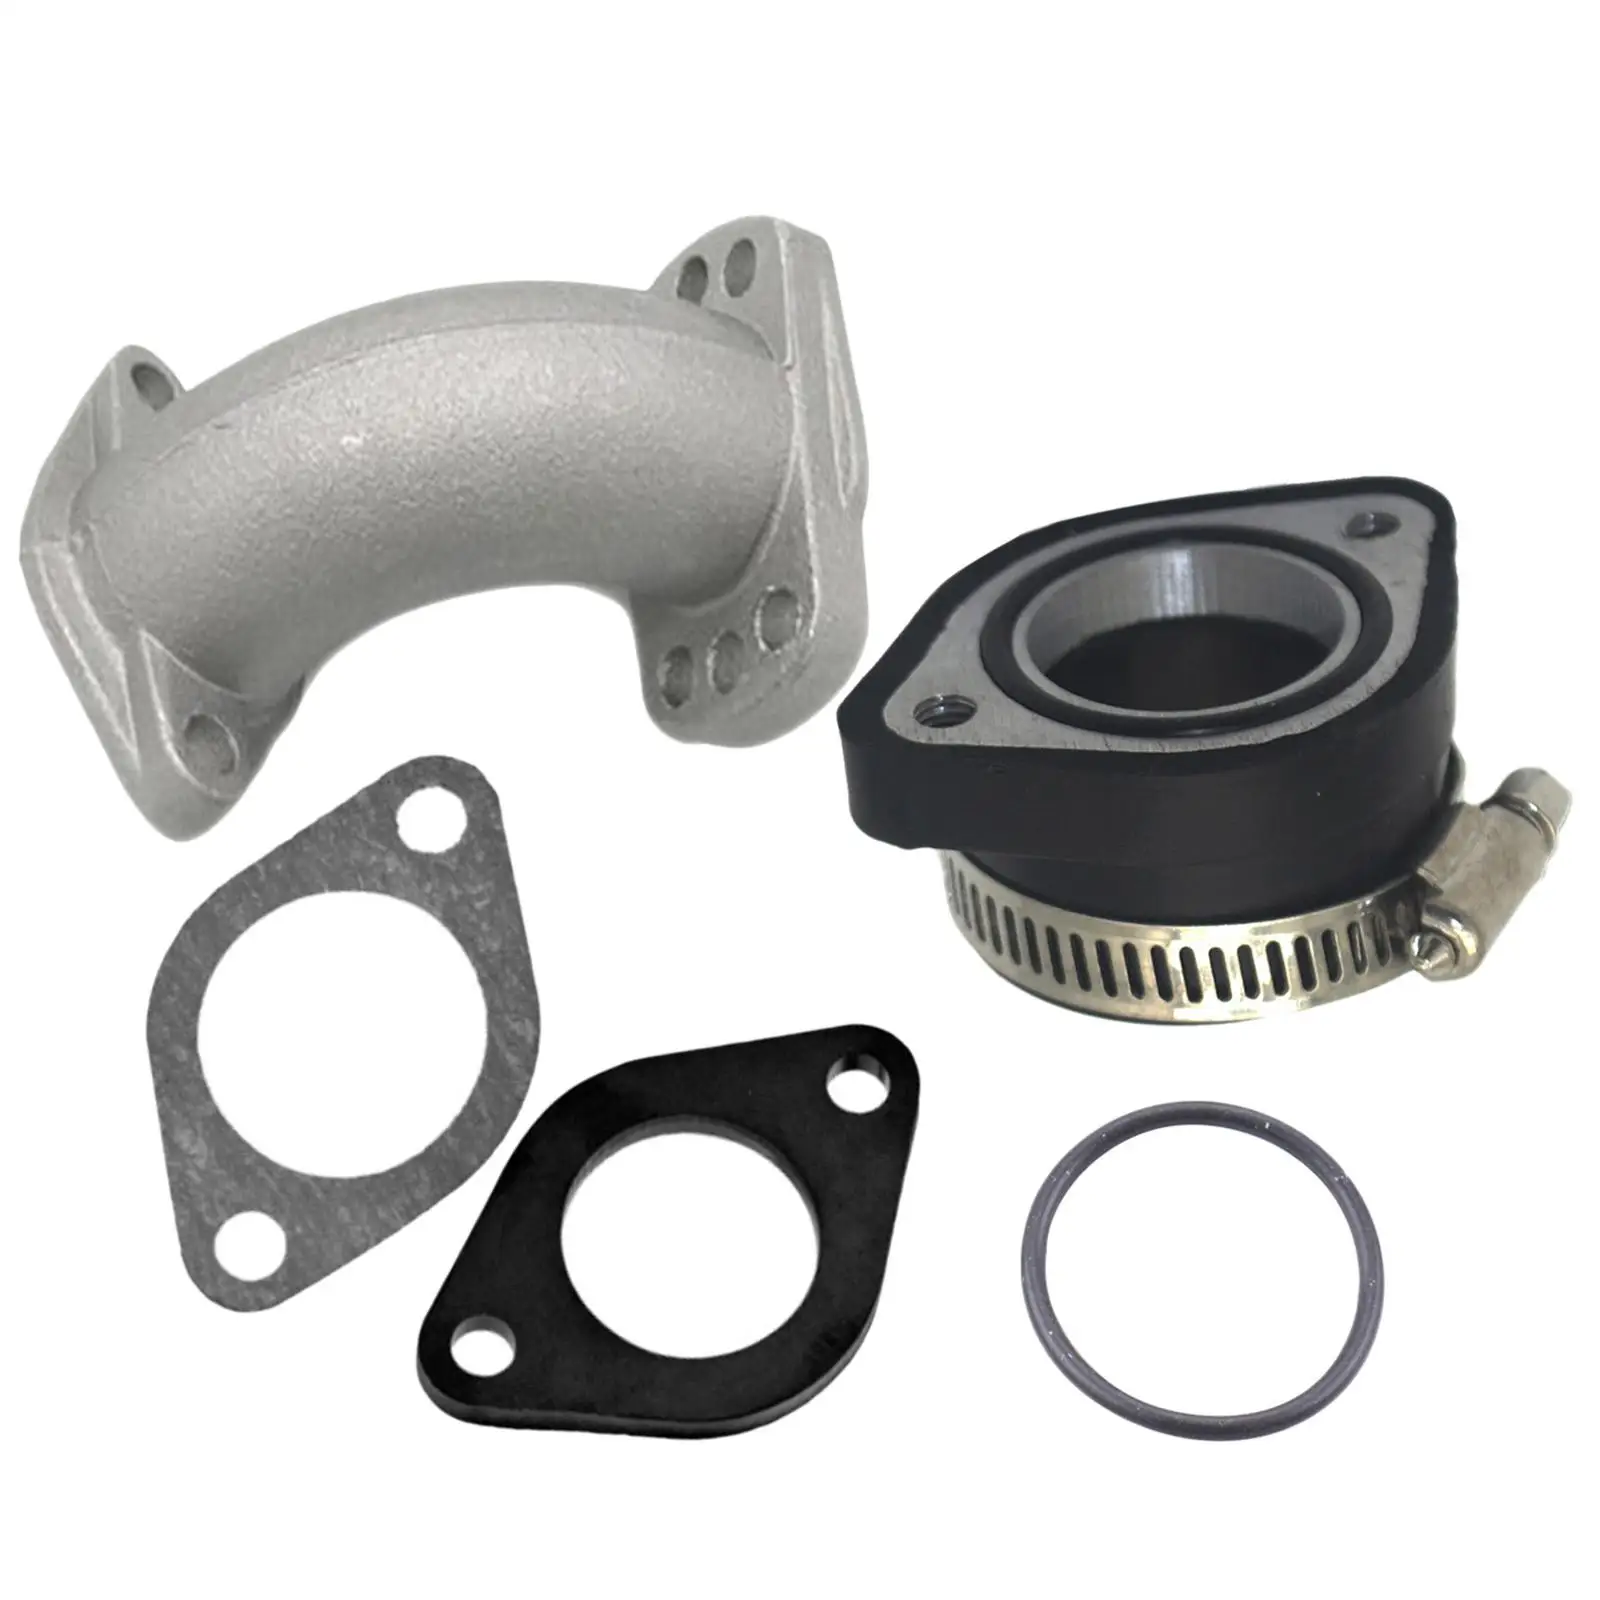 Manifold Flange & Gasket Set Accessories Carburetor Intake Adapter Boot Rubber Pipe Fit for Mikuni Vm24 ATV Moped Scooter